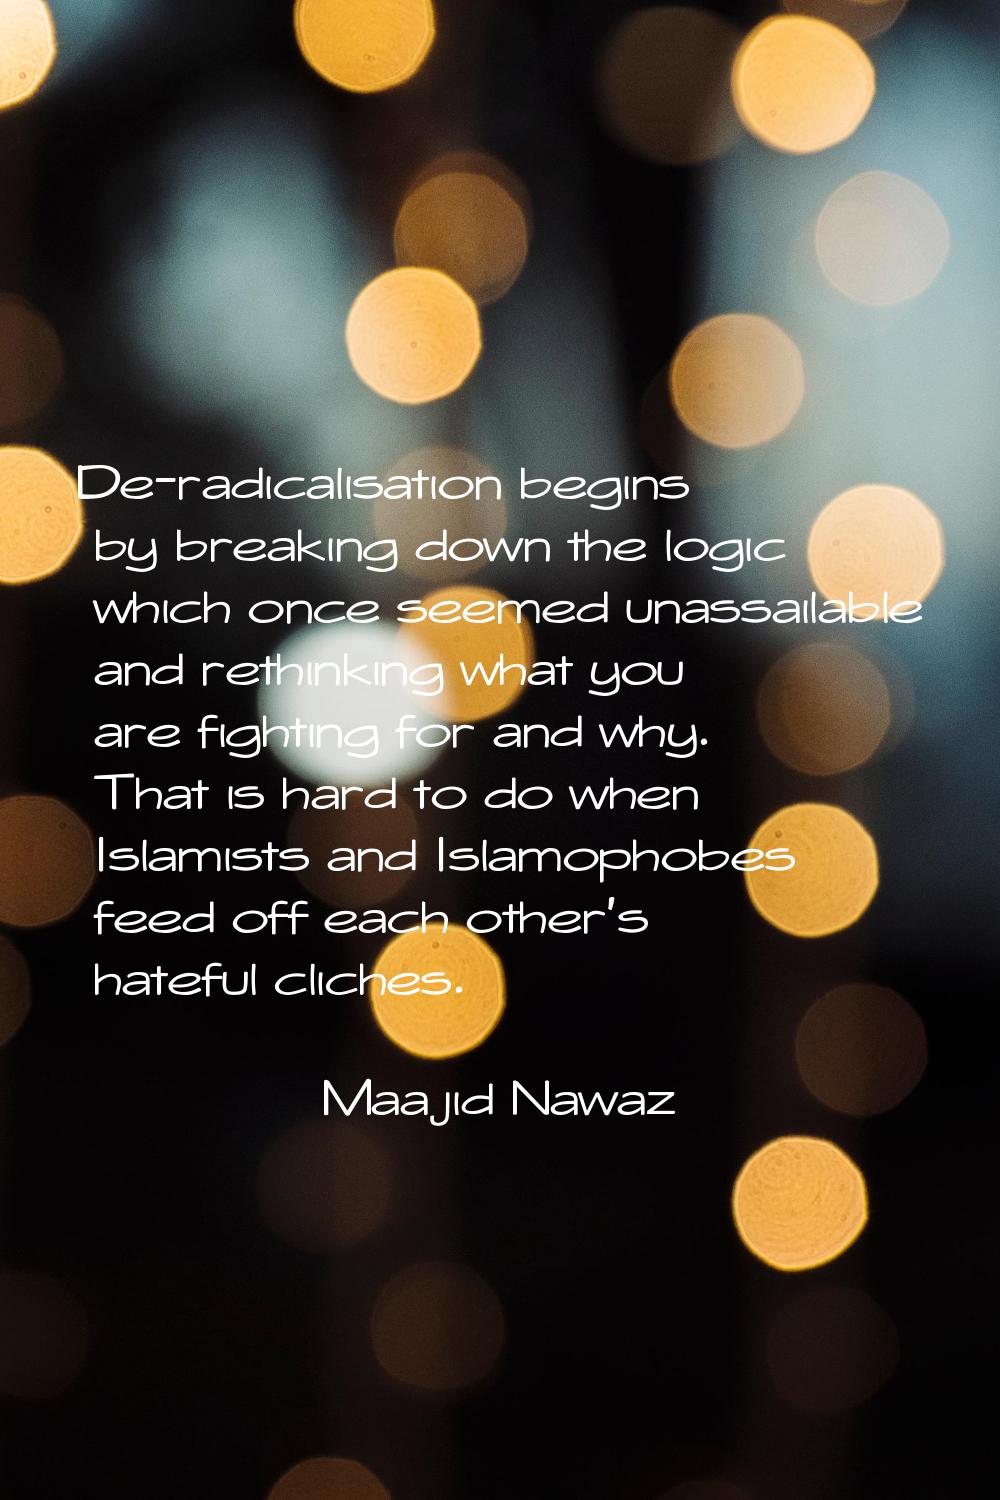 De-radicalisation begins by breaking down the logic which once seemed unassailable and rethinking w